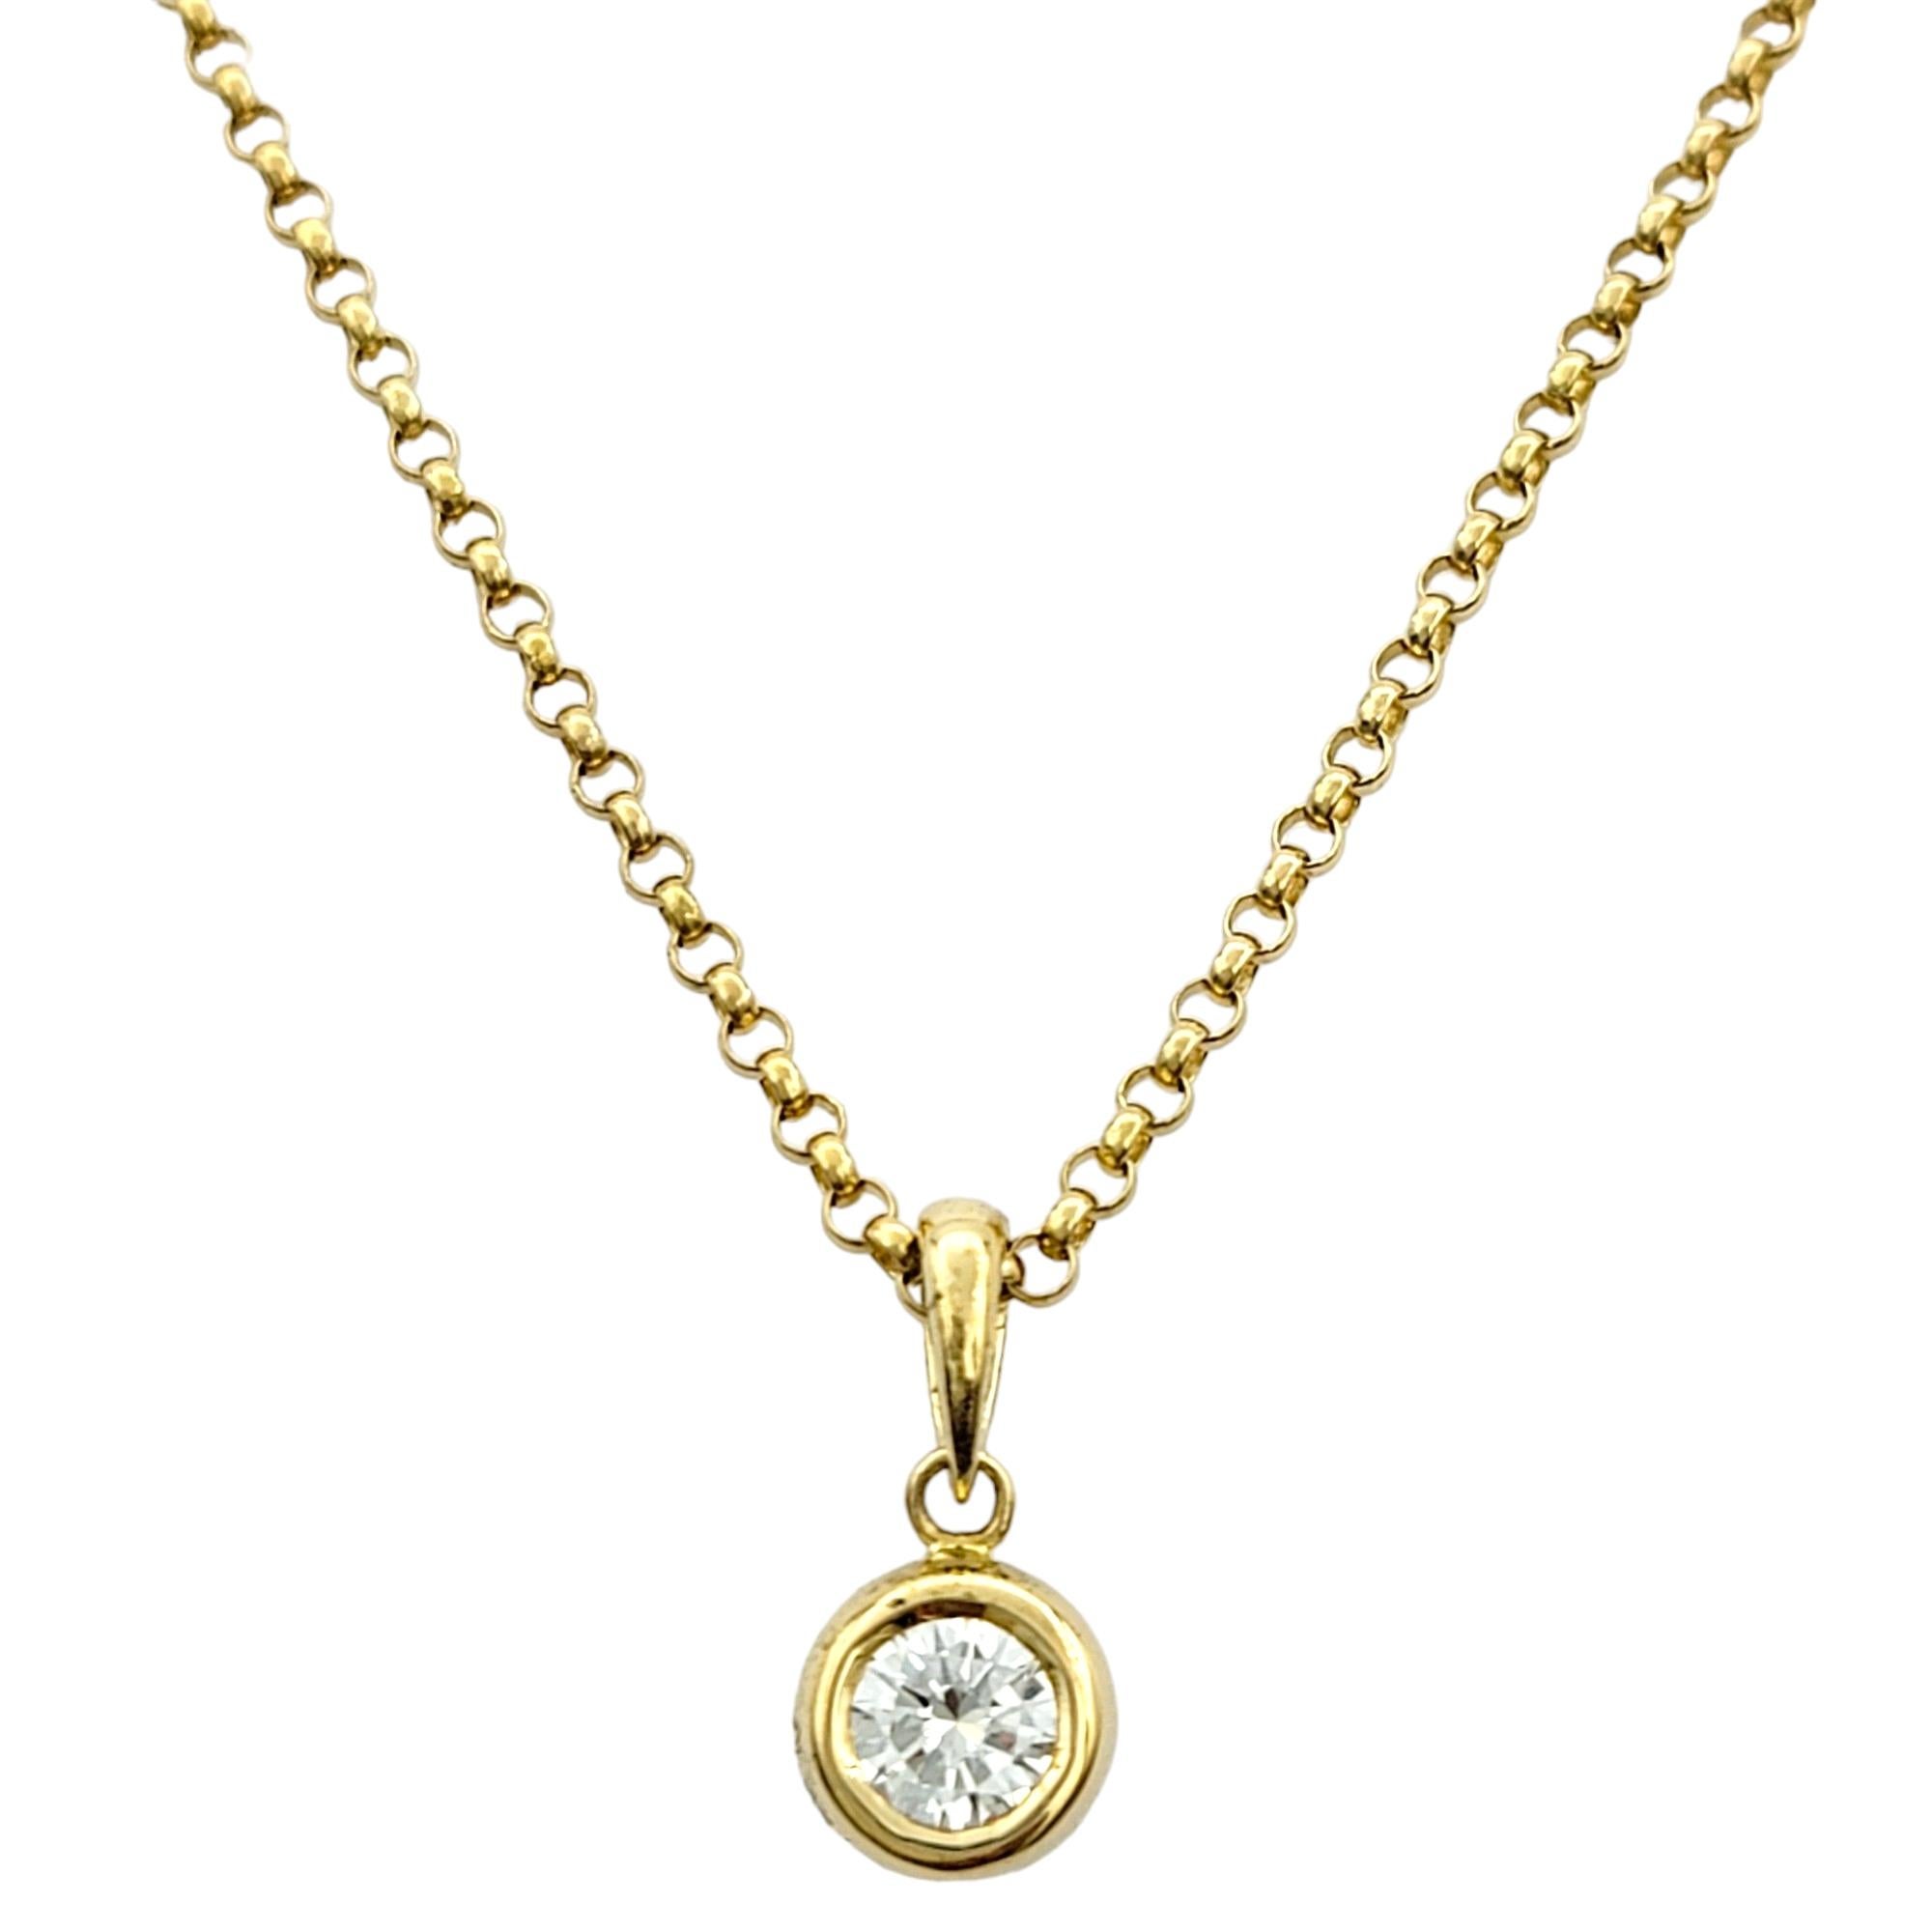 Crafted with timeless elegance, this solitaire diamond pendant necklace exudes sophistication and refinement. The pendant features a single round diamond, securely nestled within a sleek bezel setting made of lustrous 18 karat yellow gold. The bezel